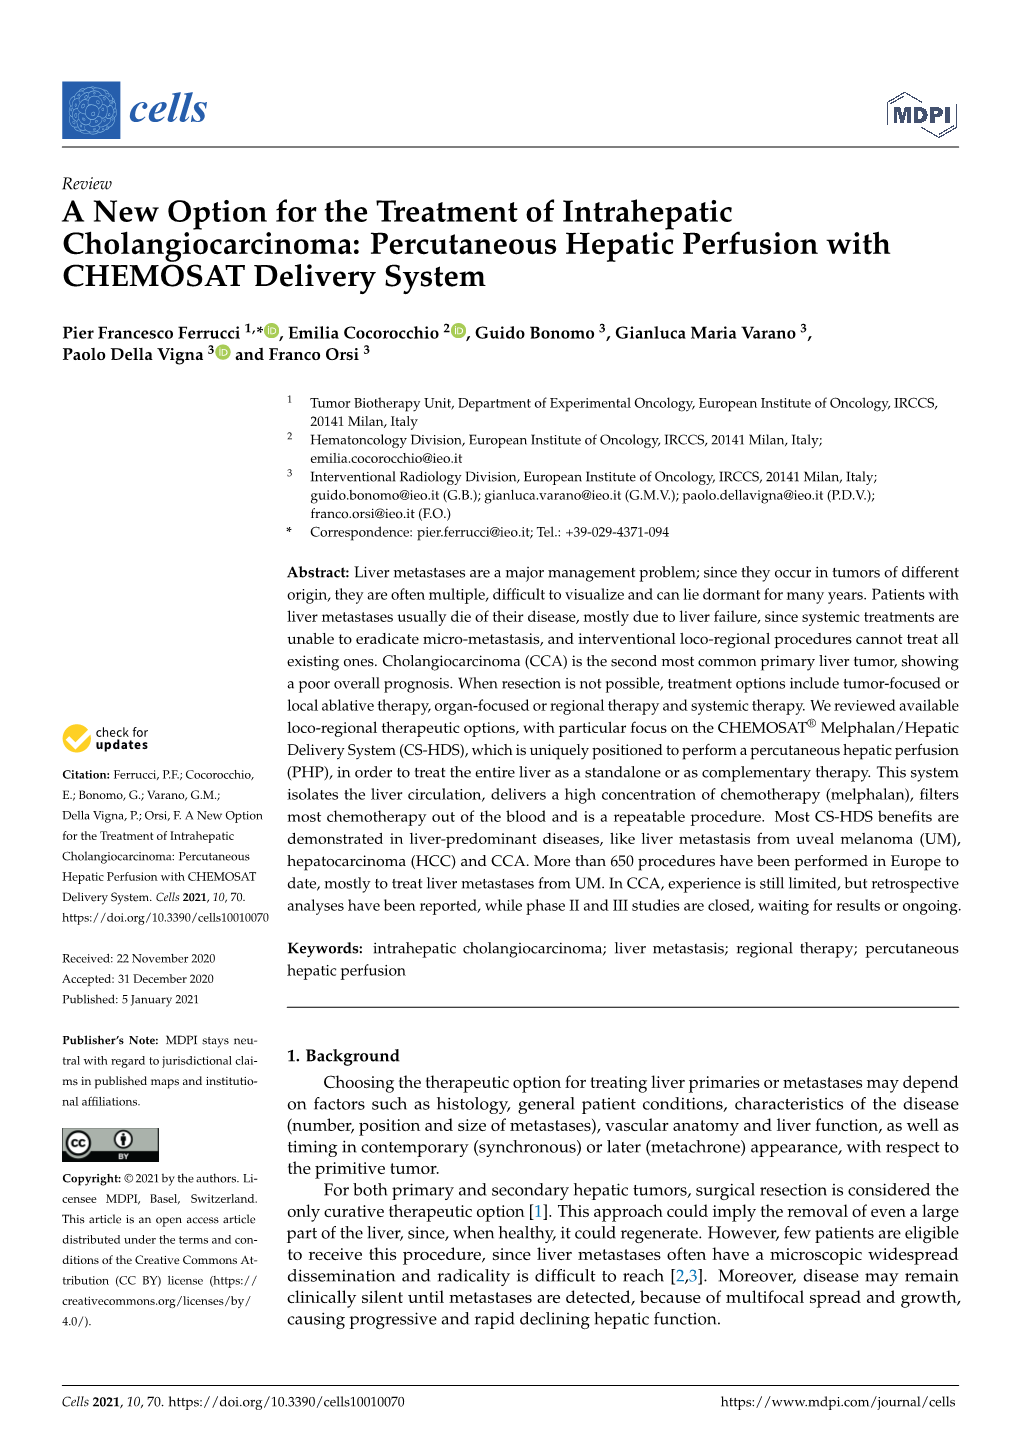 Percutaneous Hepatic Perfusion with CHEMOSAT Delivery System